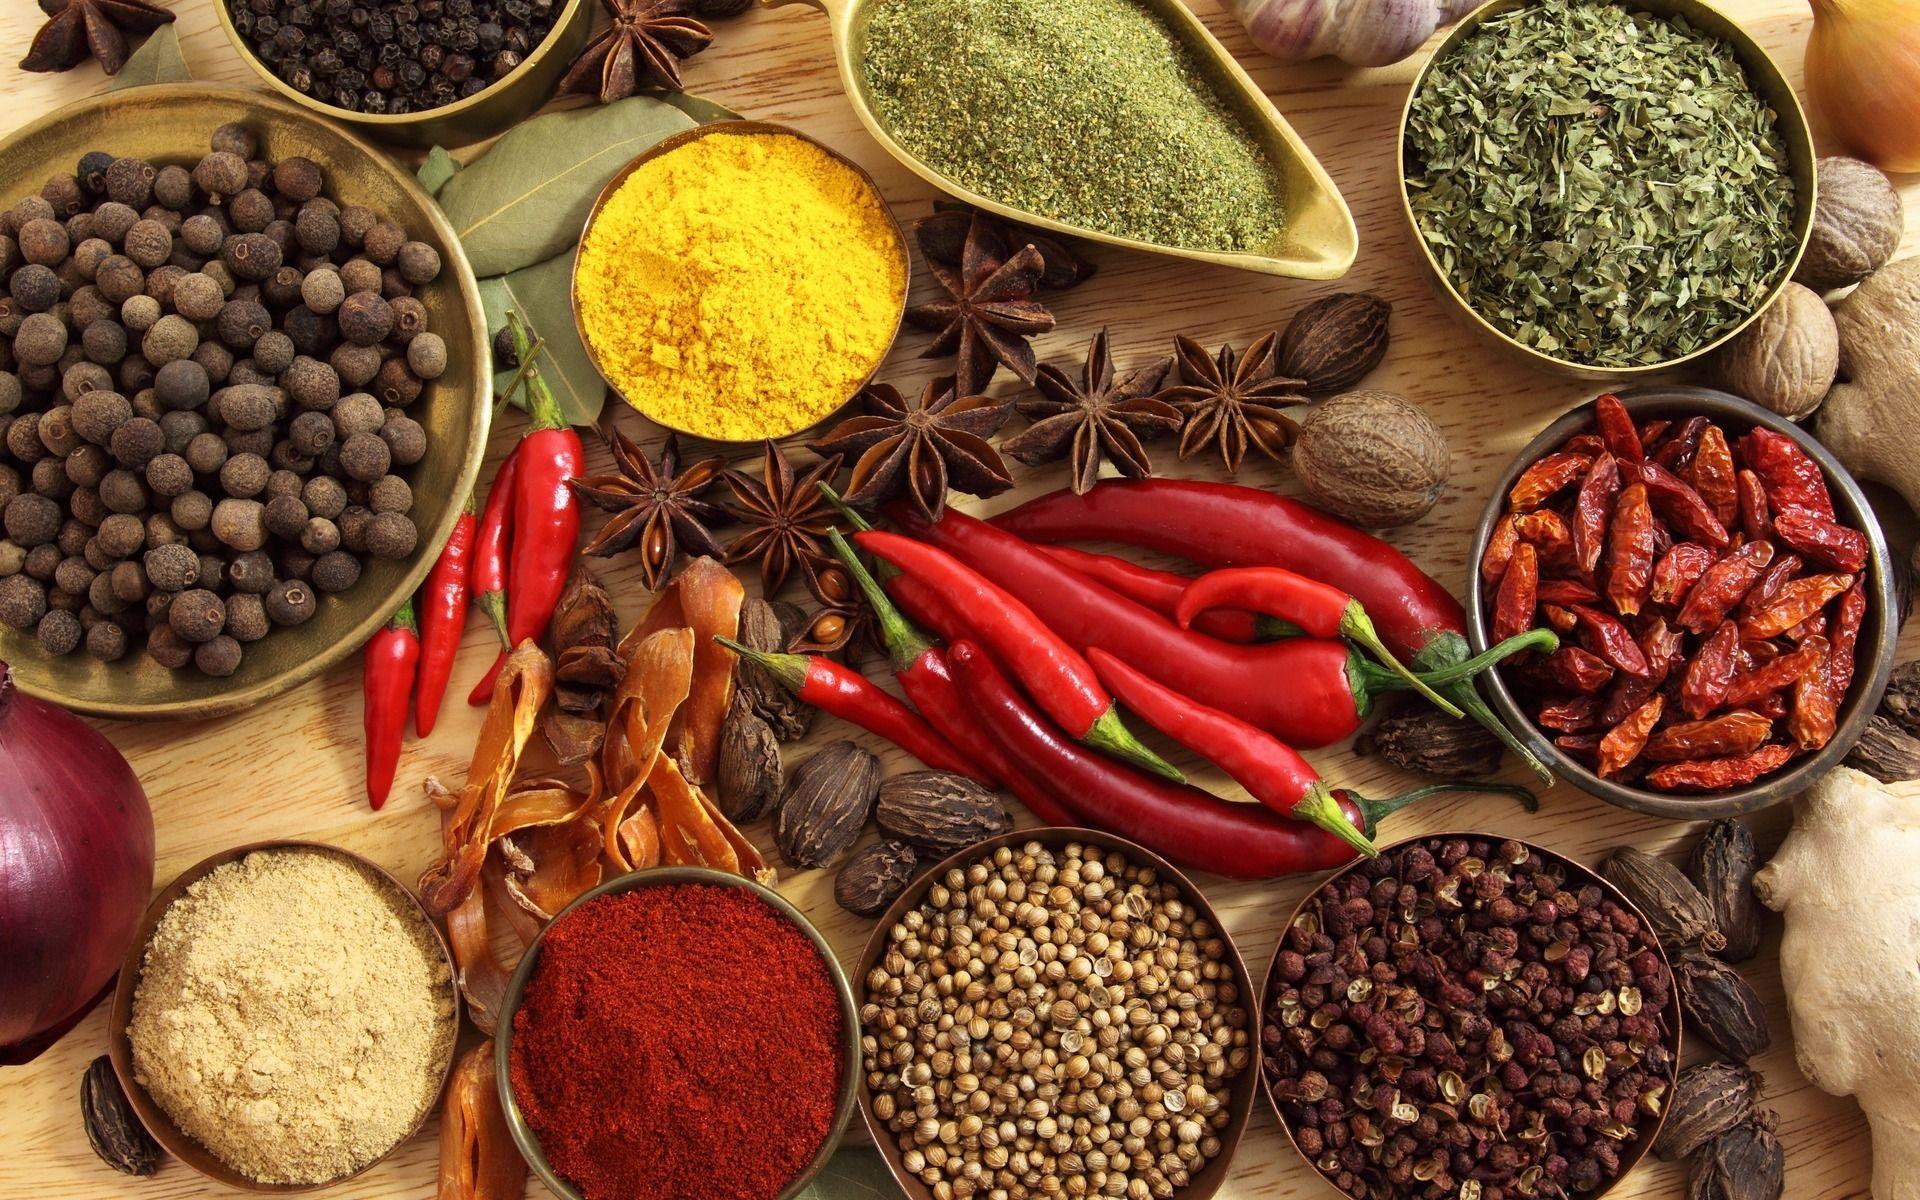 Top Image: Spice Wallpaper, Amazing Spice Image Collection